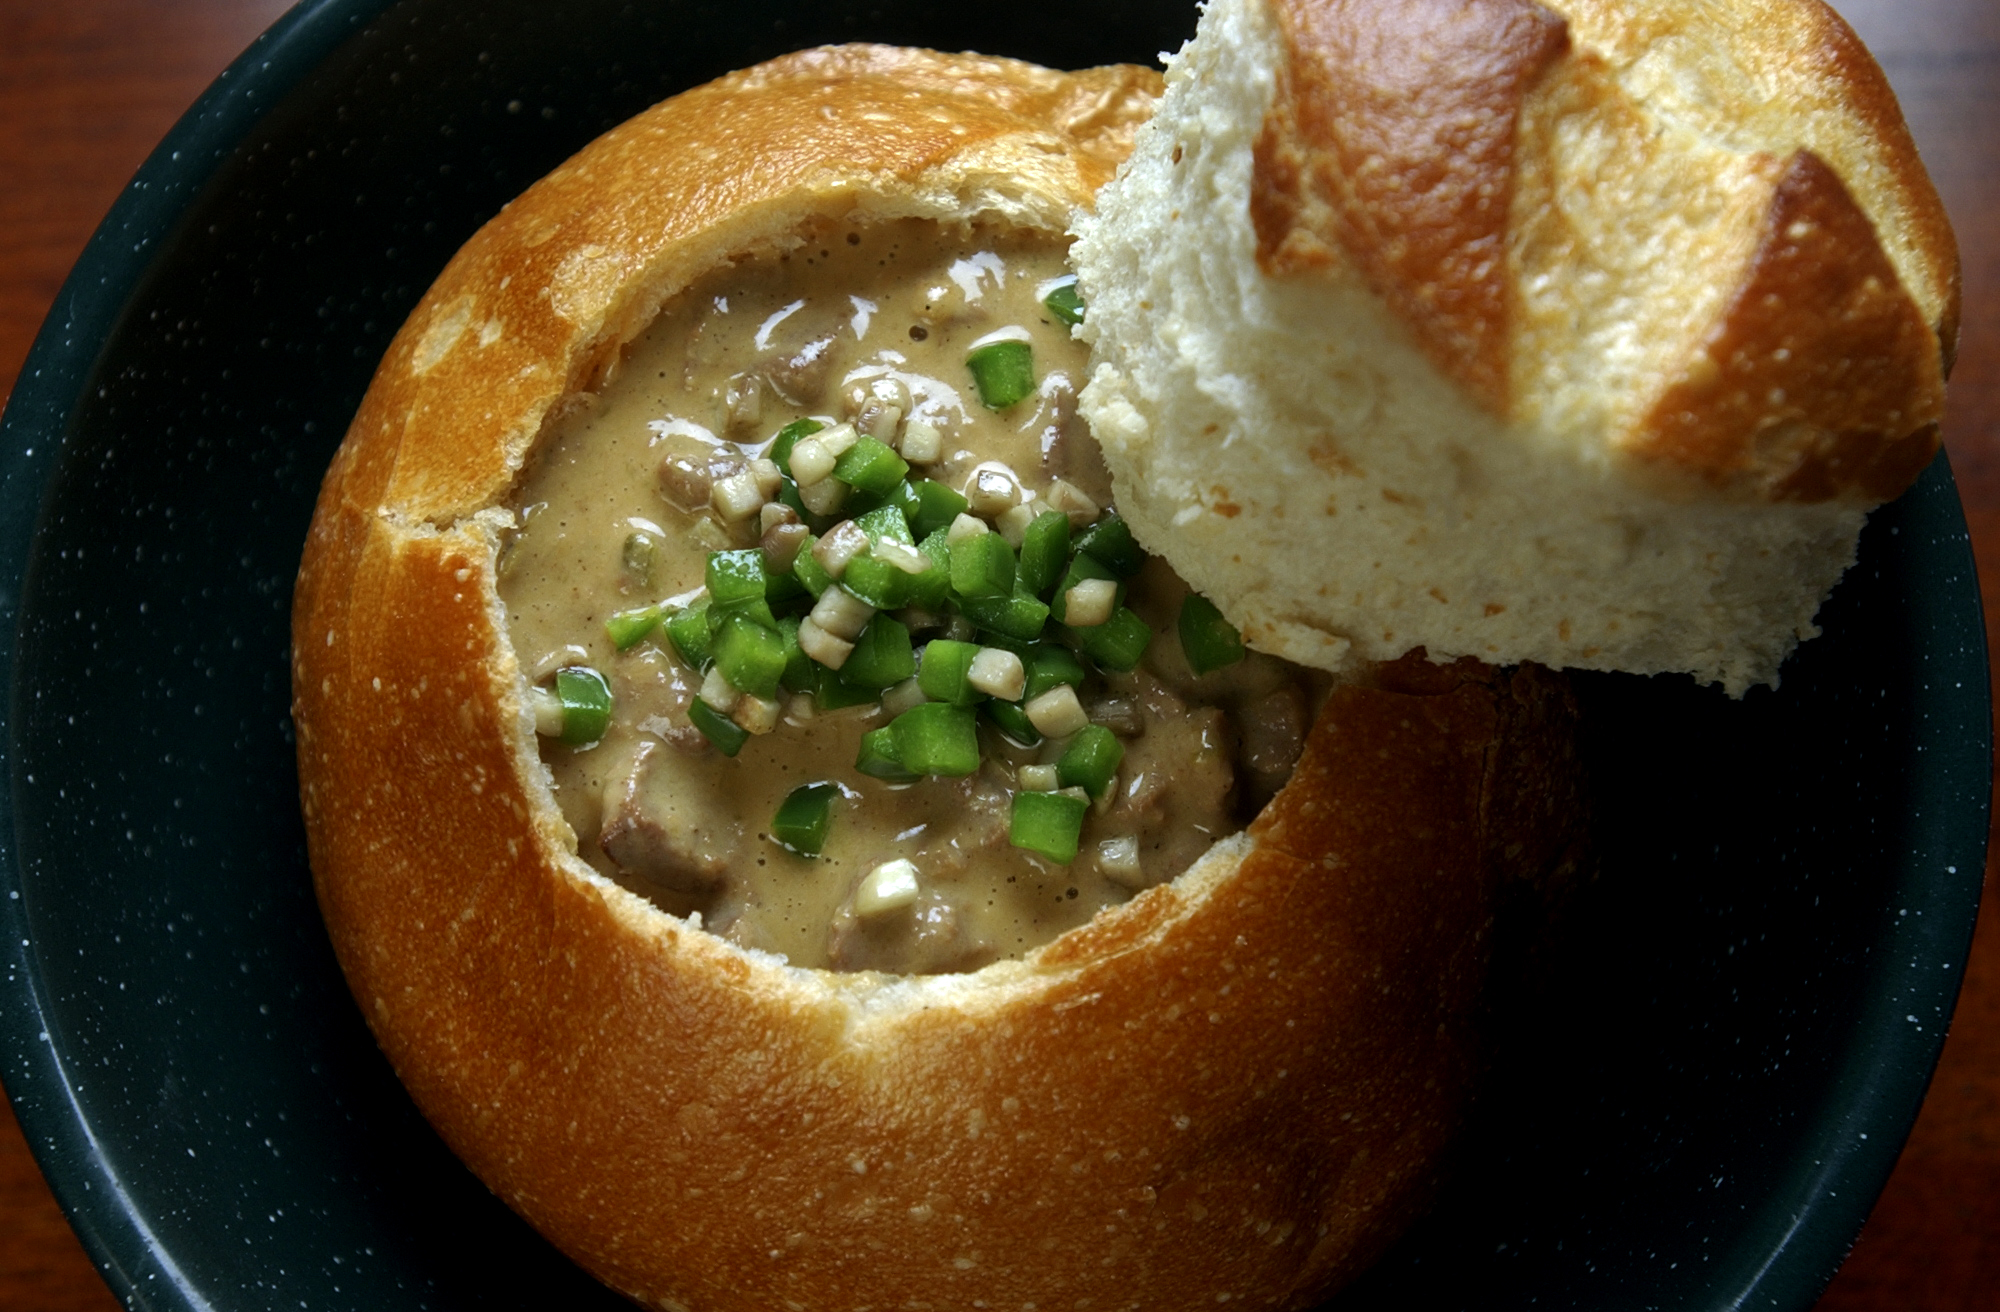 DENVER, CO, JAN. 25, 2005 - Soup/bread bowl for super bowl page. PHILLY CHEESESTEAK SOUP (DENVER POST STAFF PHOTO BY KATHRYN SCOTT OSLER)